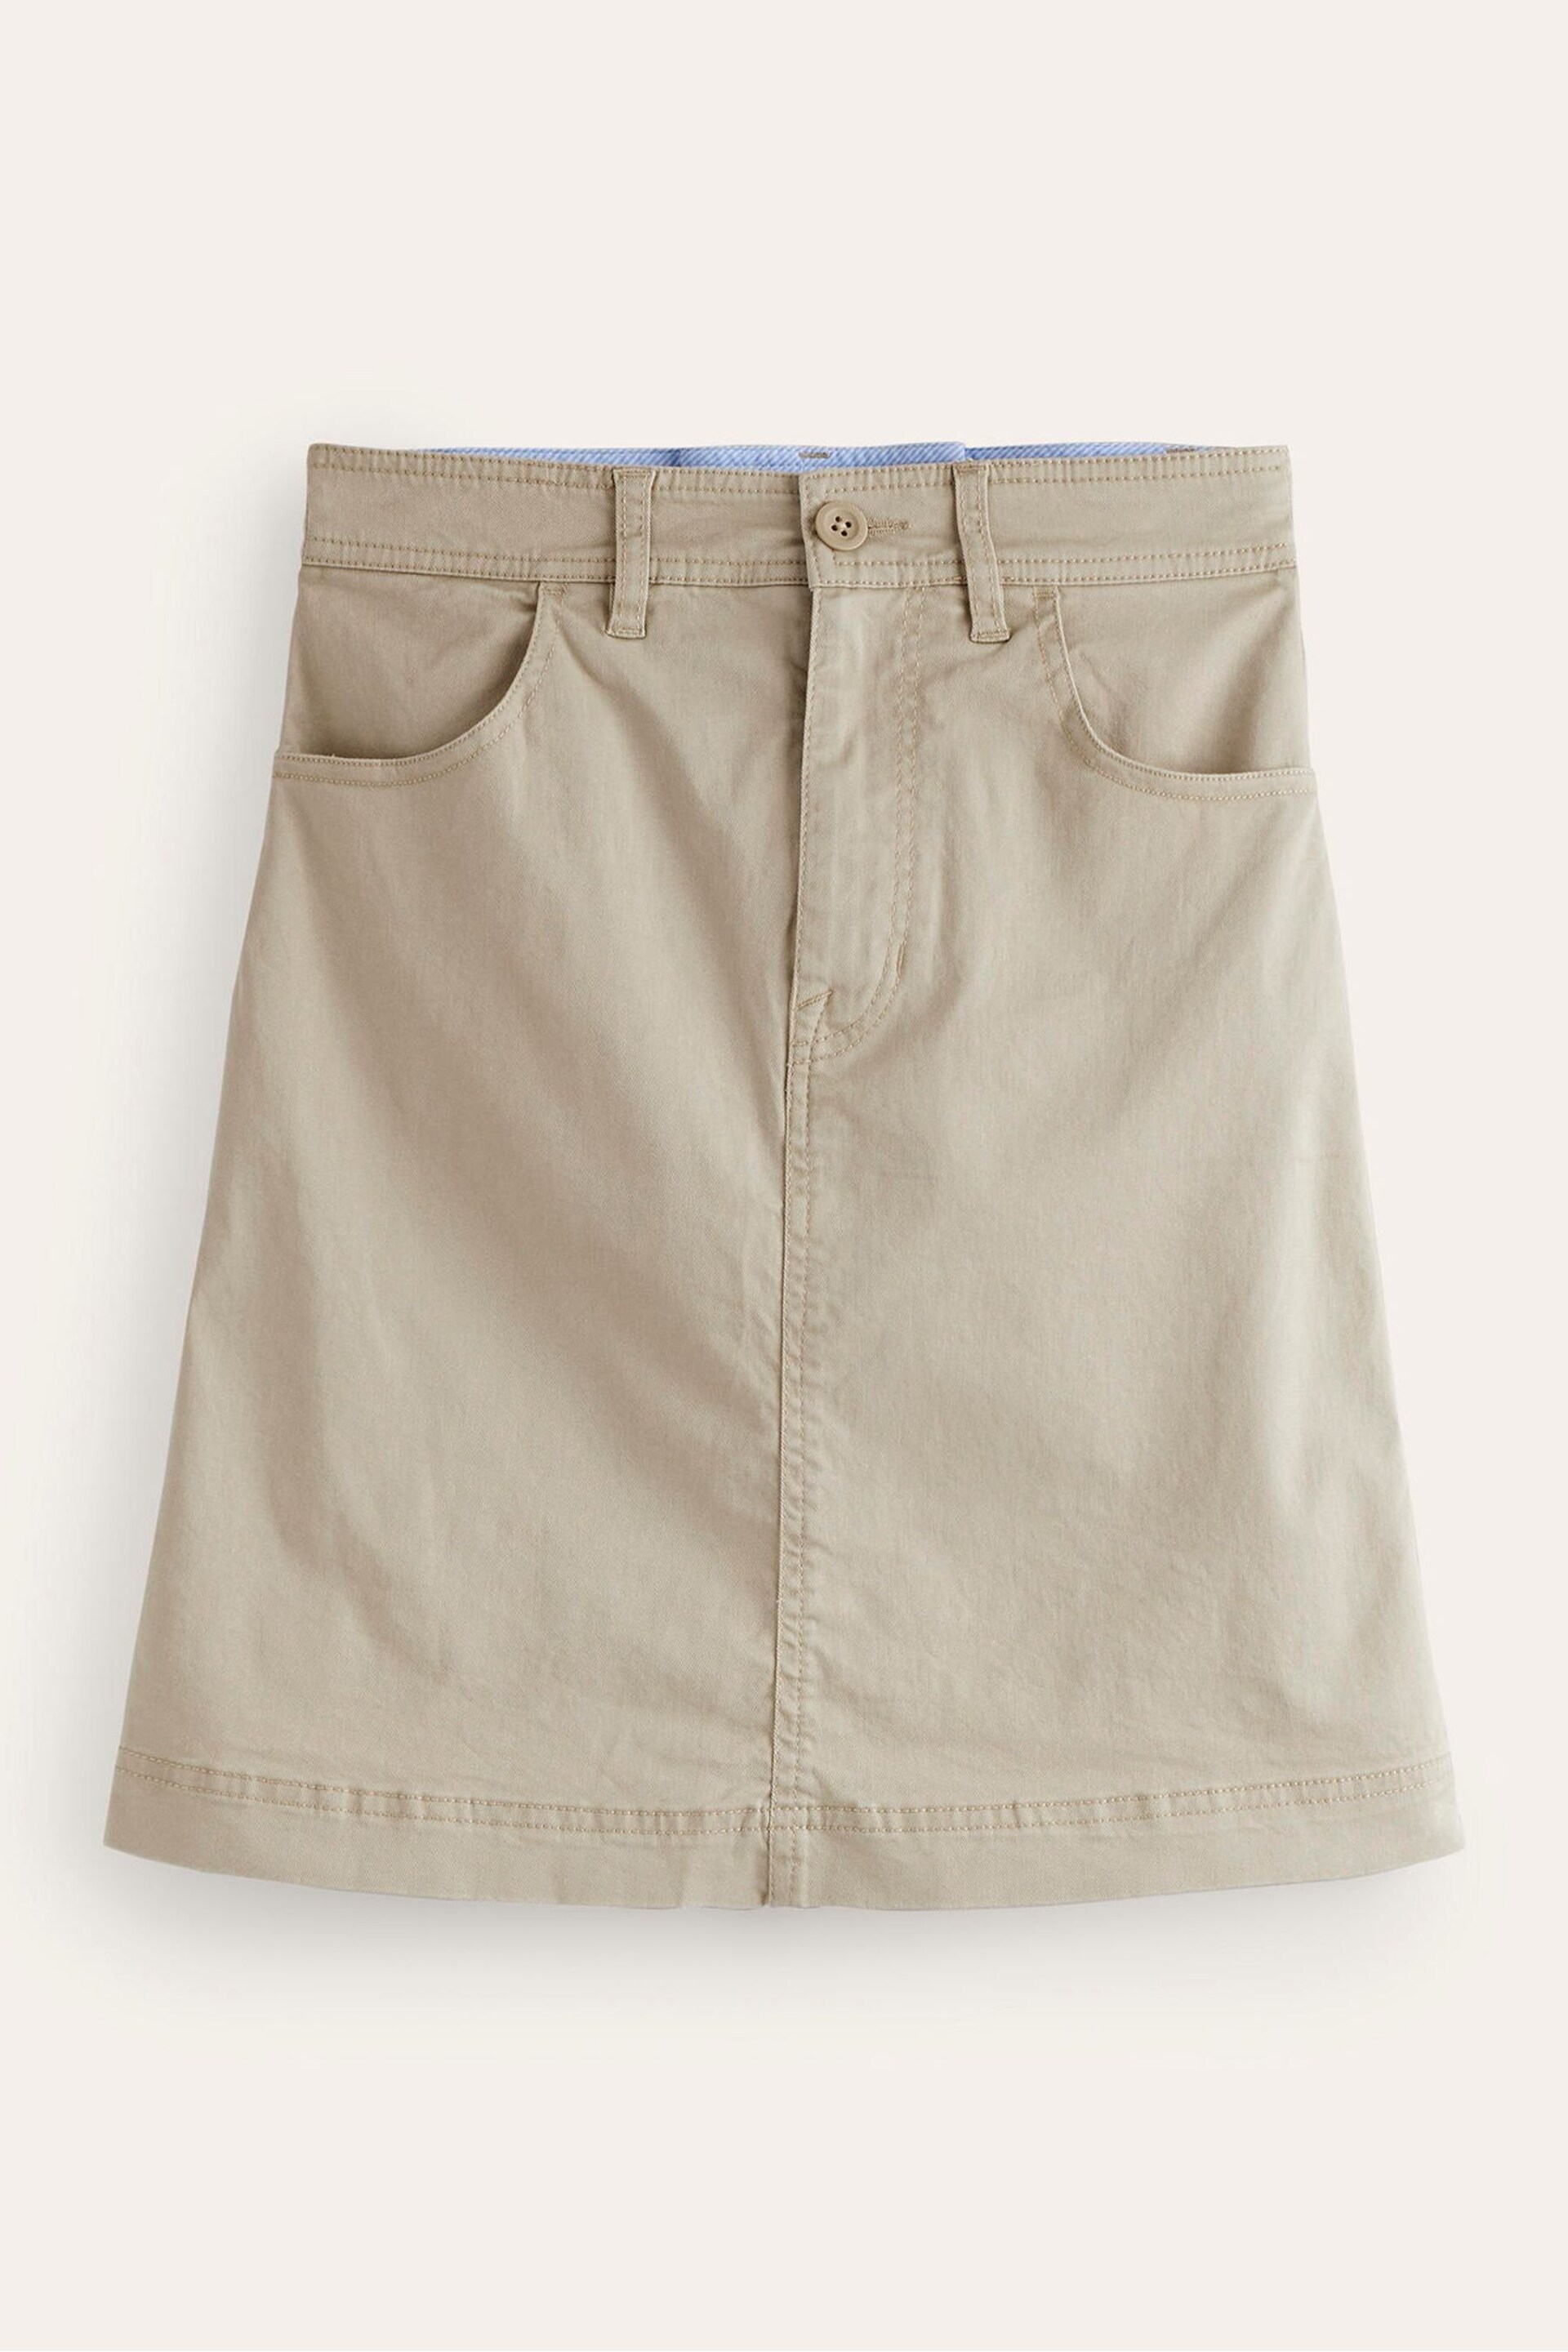 Boden Natural Nell Chinos Mini Skirt - Image 5 of 5